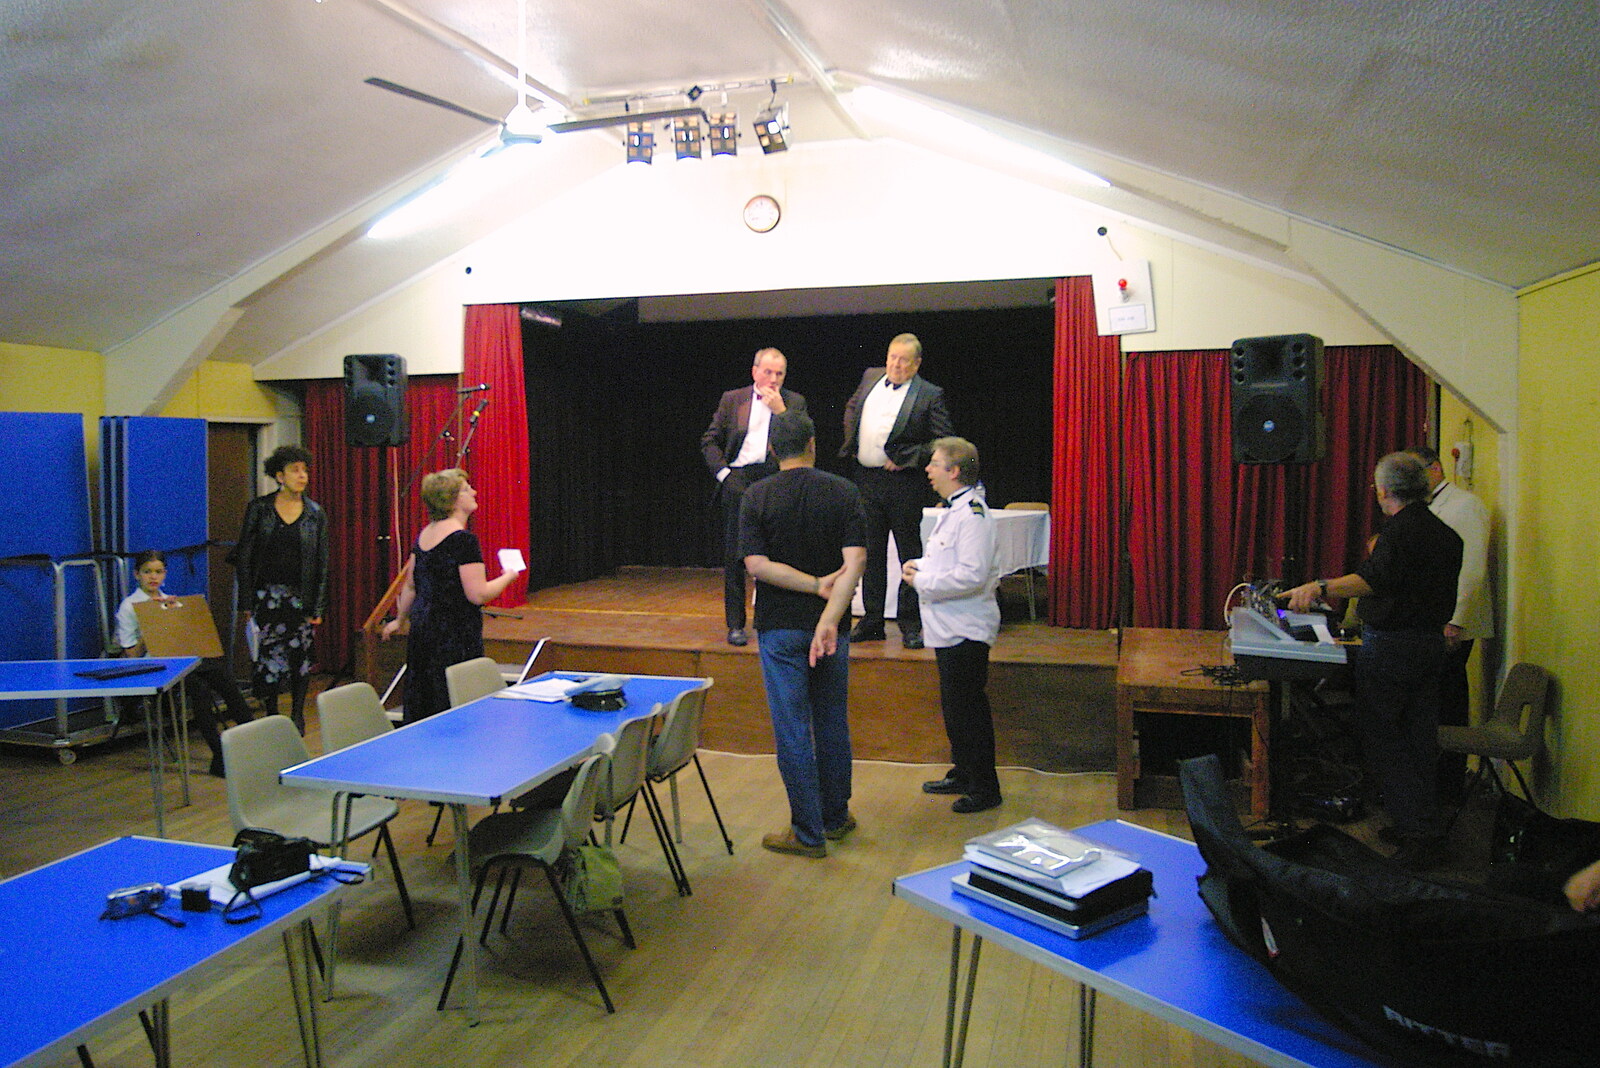 The BSCC Presentation and a Murder Mystery, Brome and Gislingham, Suffolk- 6th October 2005: Gislingham Village Hall